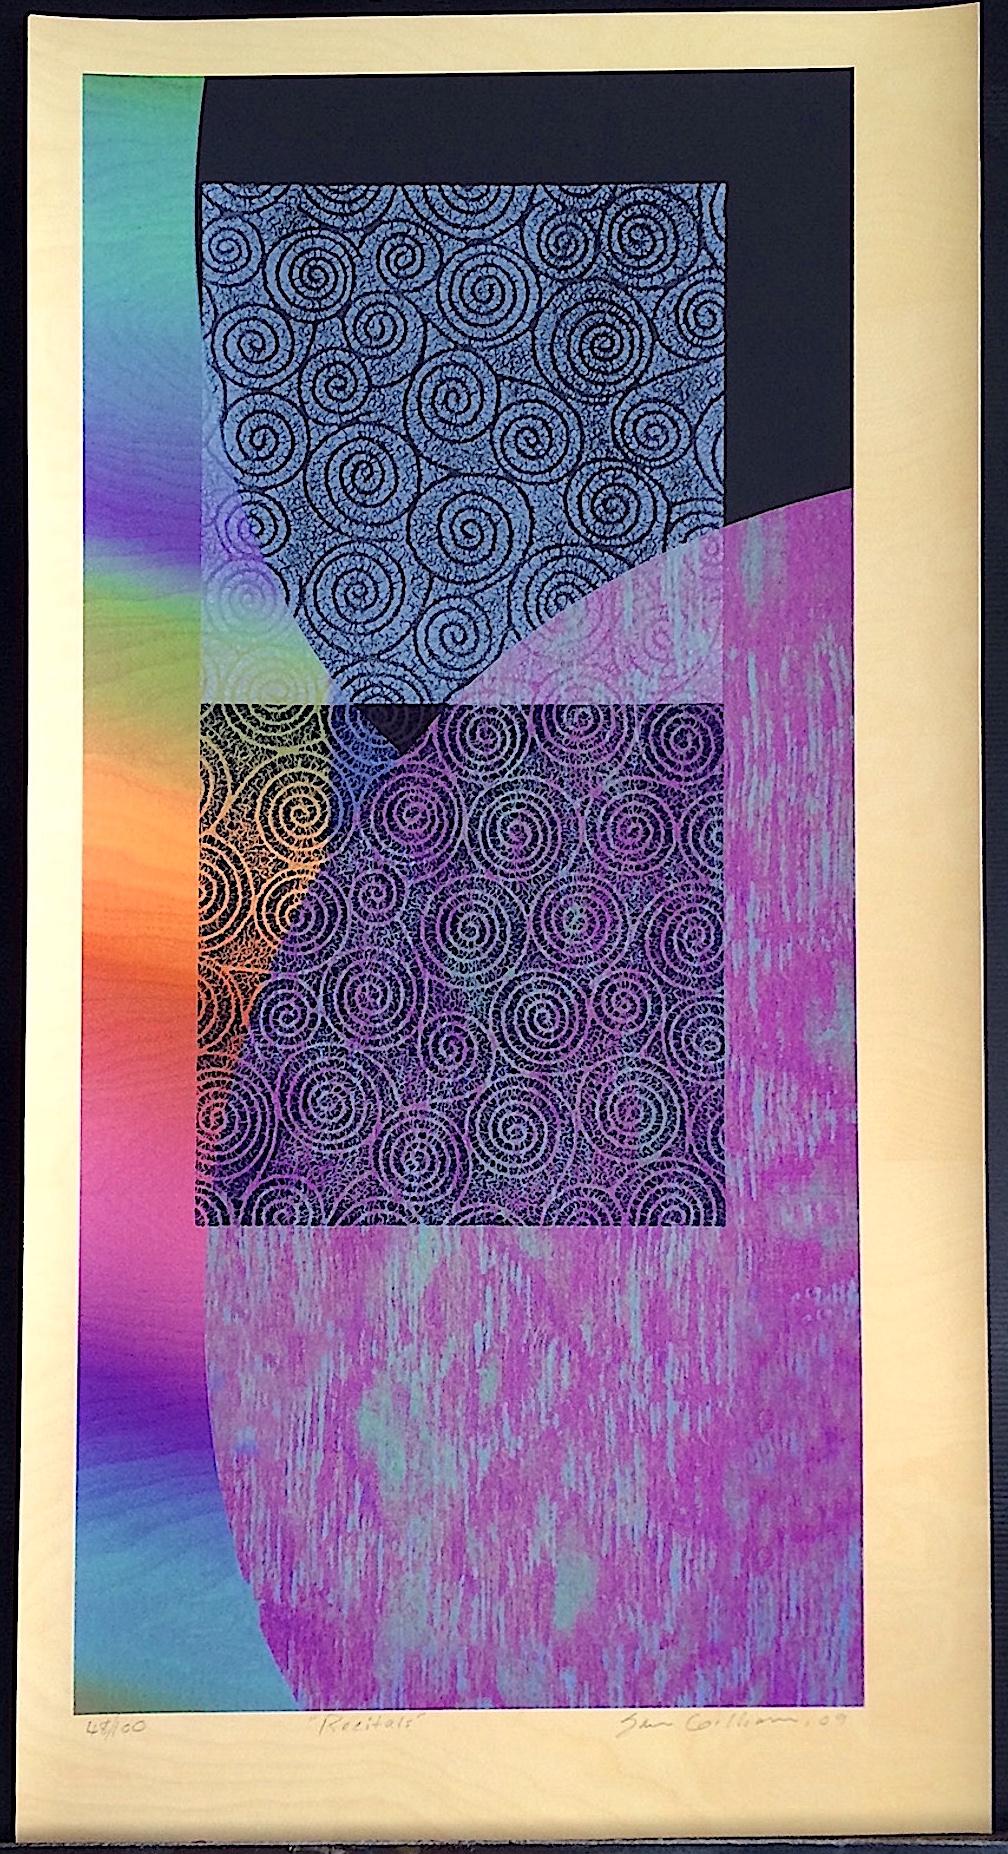 RECITALS is mixed media limited edition print by the renowned African American artist Sam Gilliam, created using Archival Inkjet, Relief, and Stencil techniques. This vertical, rainbow colored, bold geometric composition presents the viewer with an